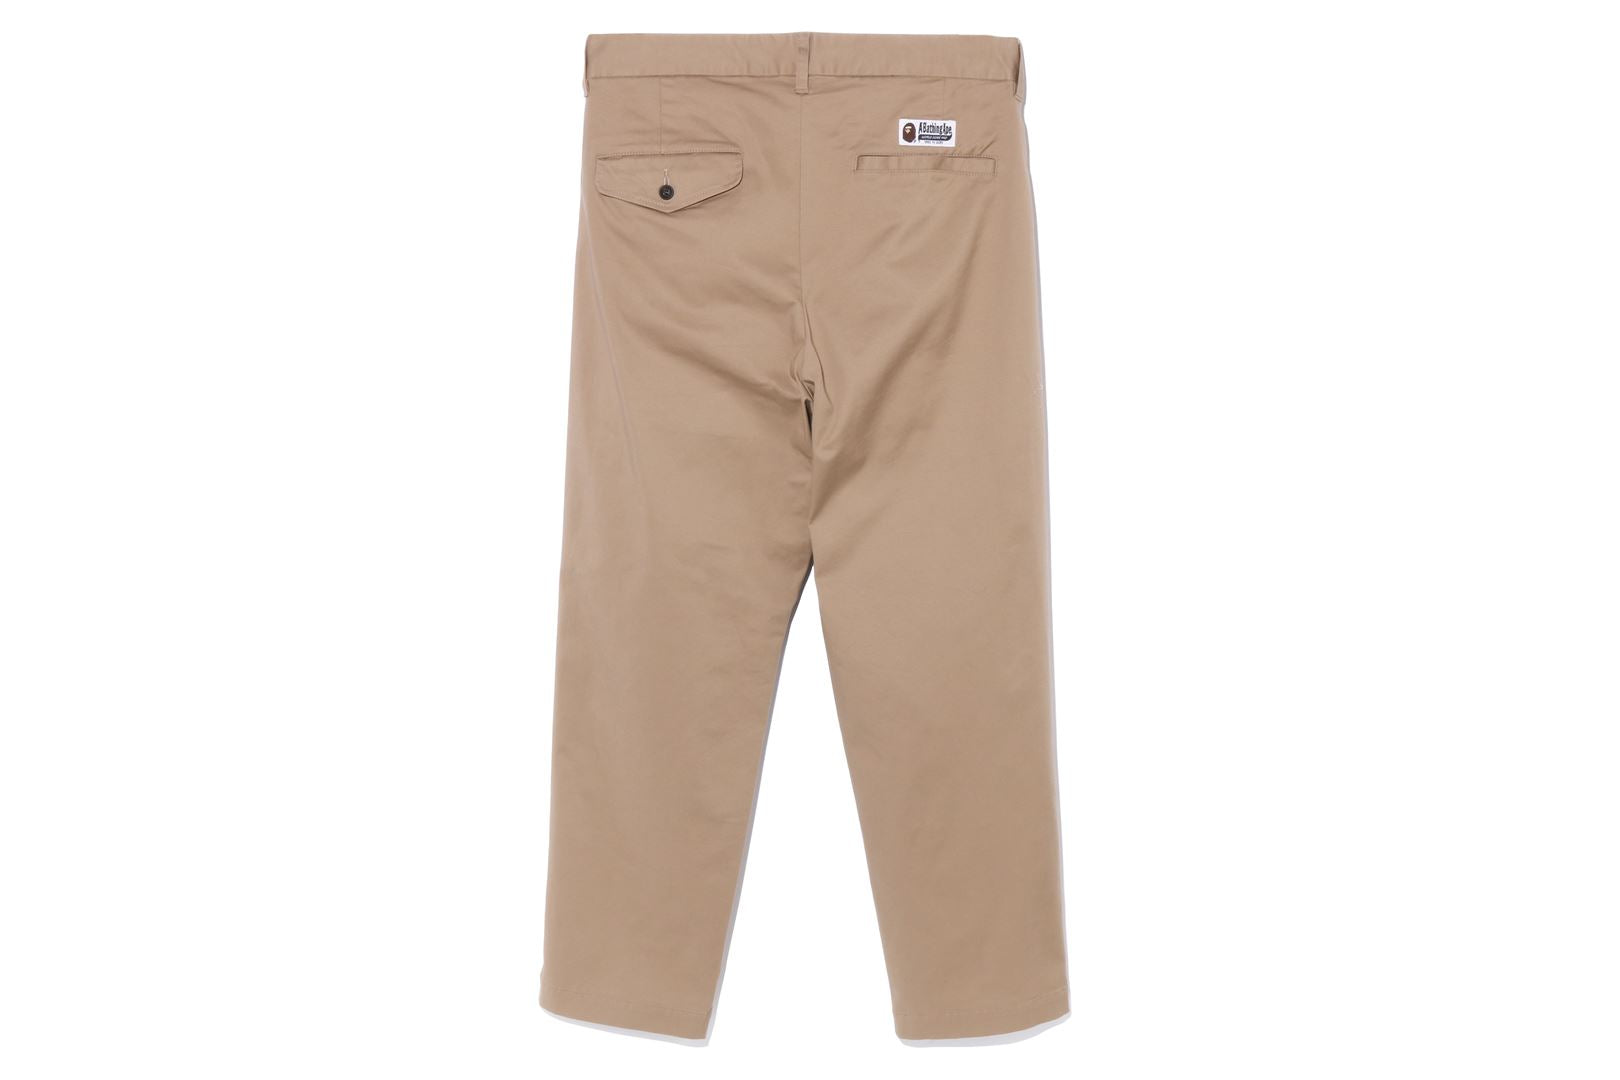 Buy Ascot Solid Beige Relaxed Fit Chinos from Westside